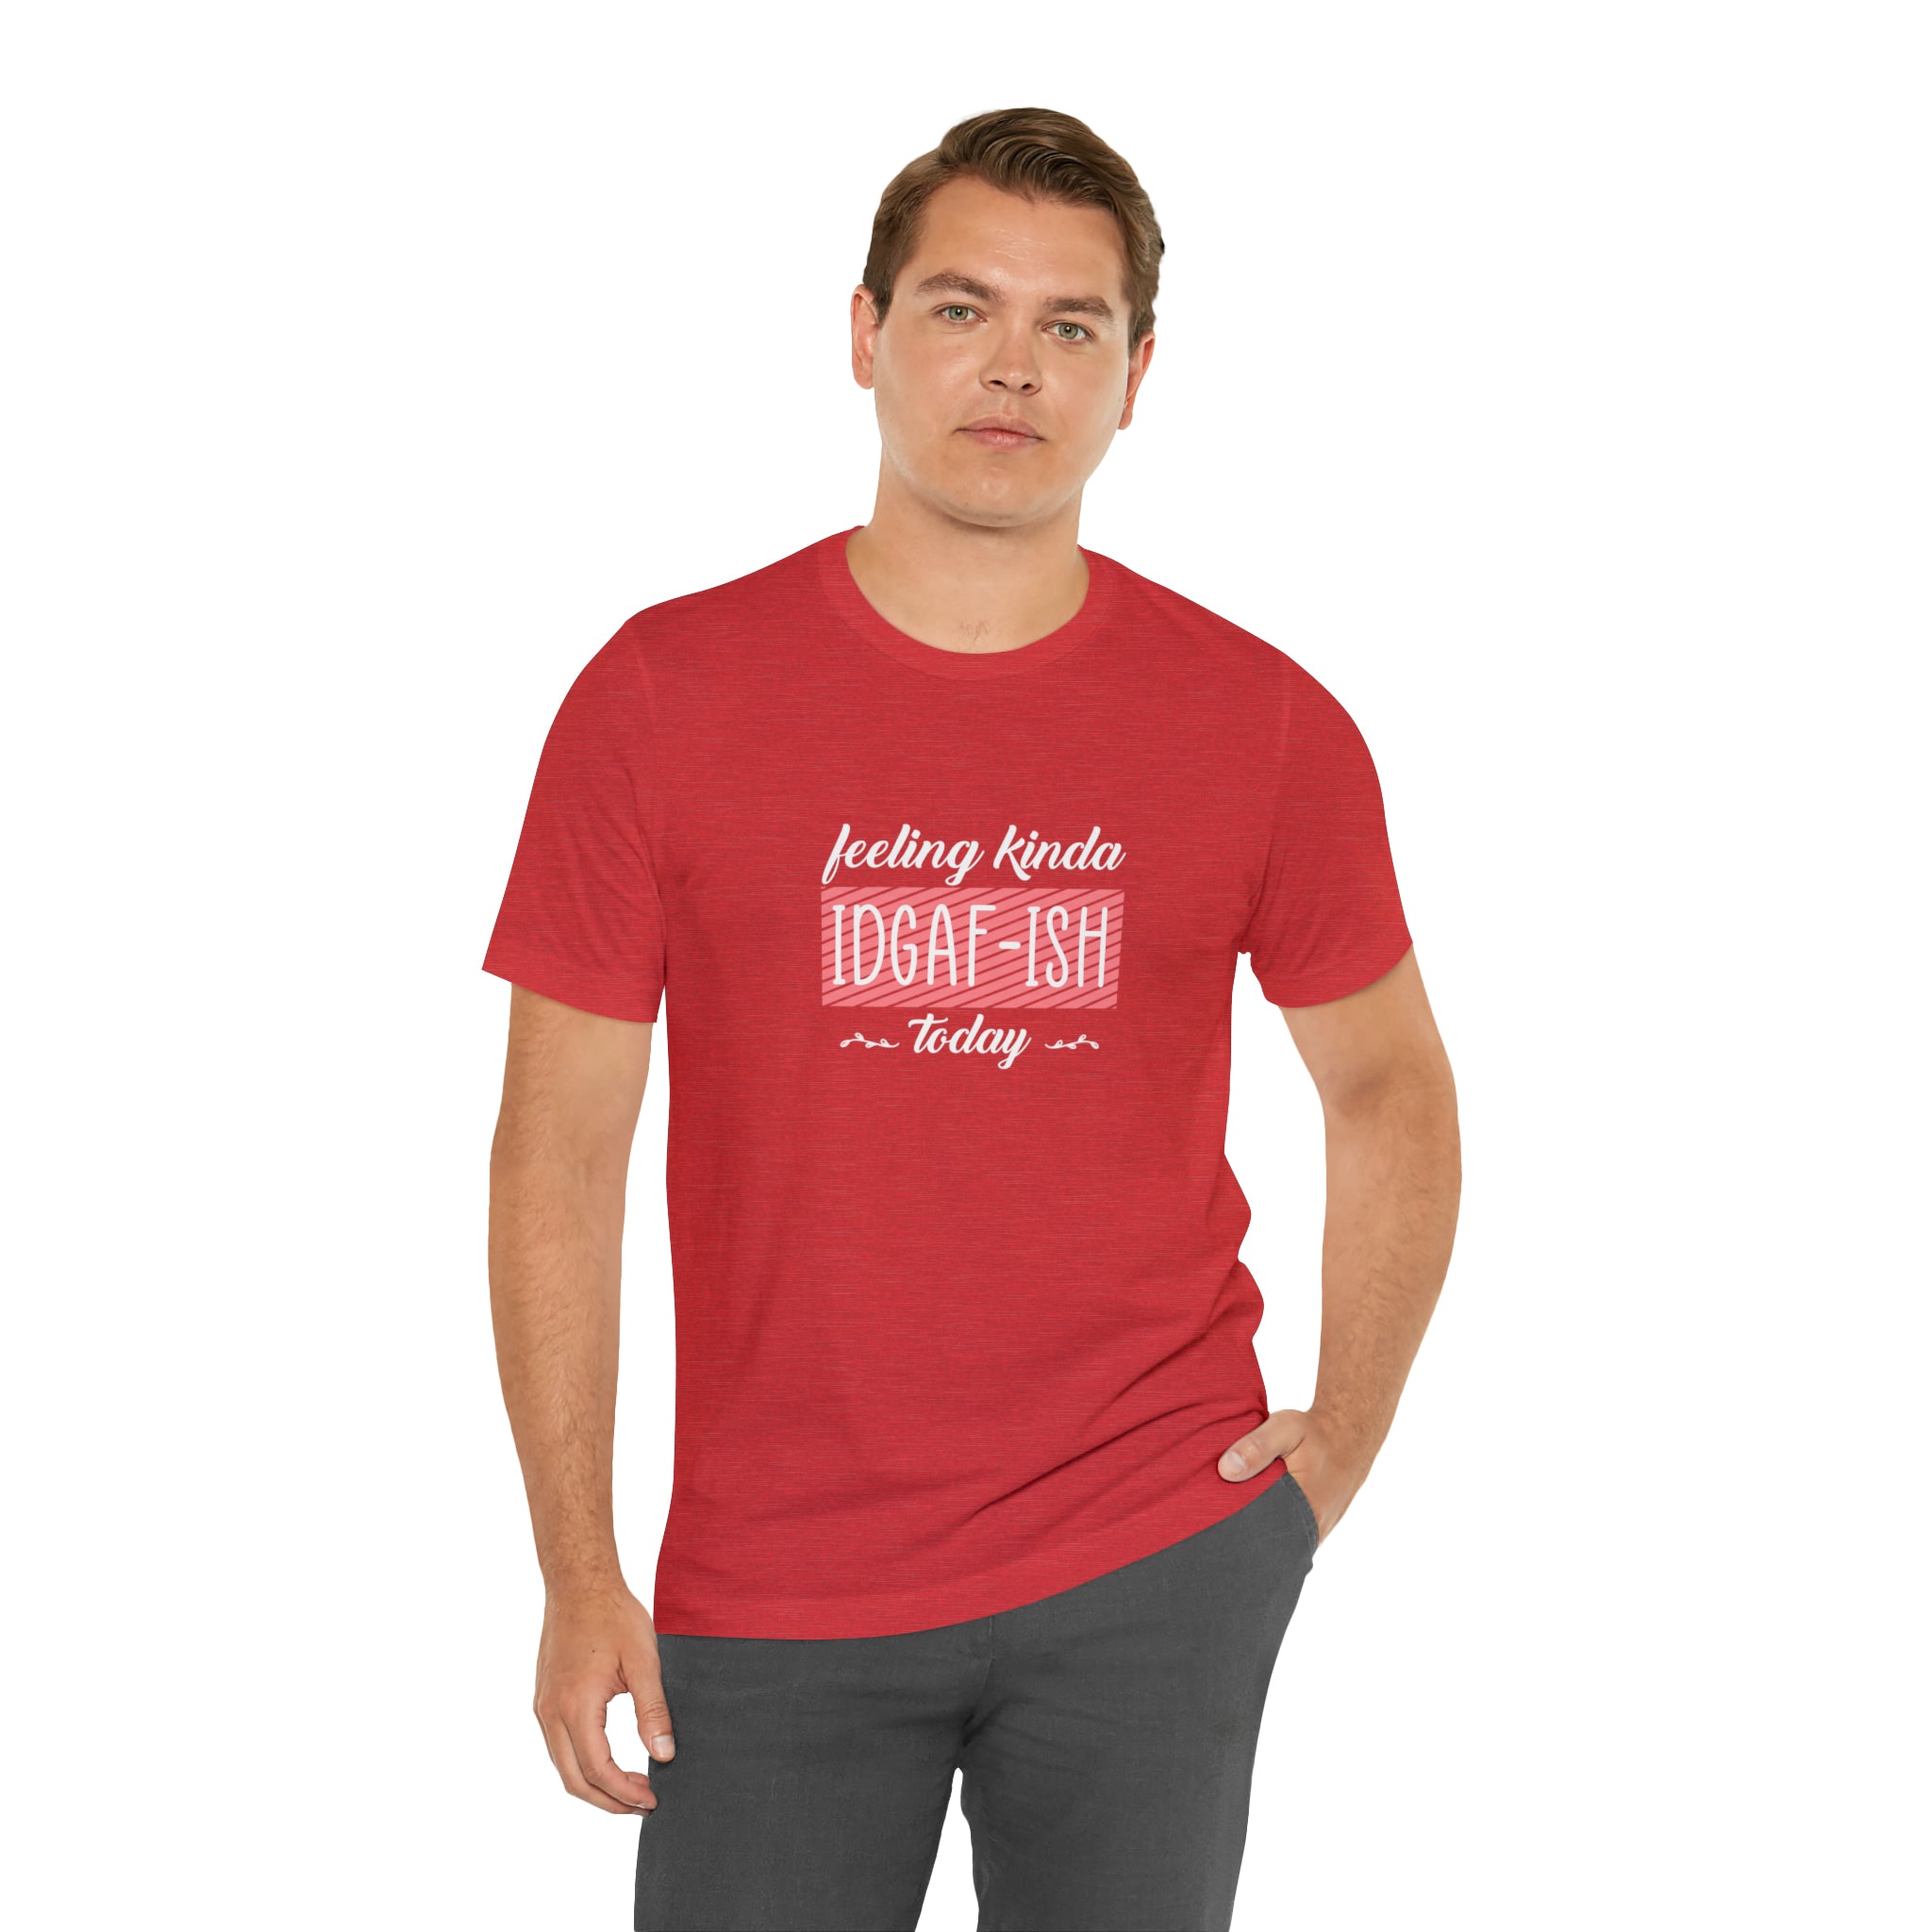 A man wearing a red Feeling kinda T-Shirt with the brand name Printify.